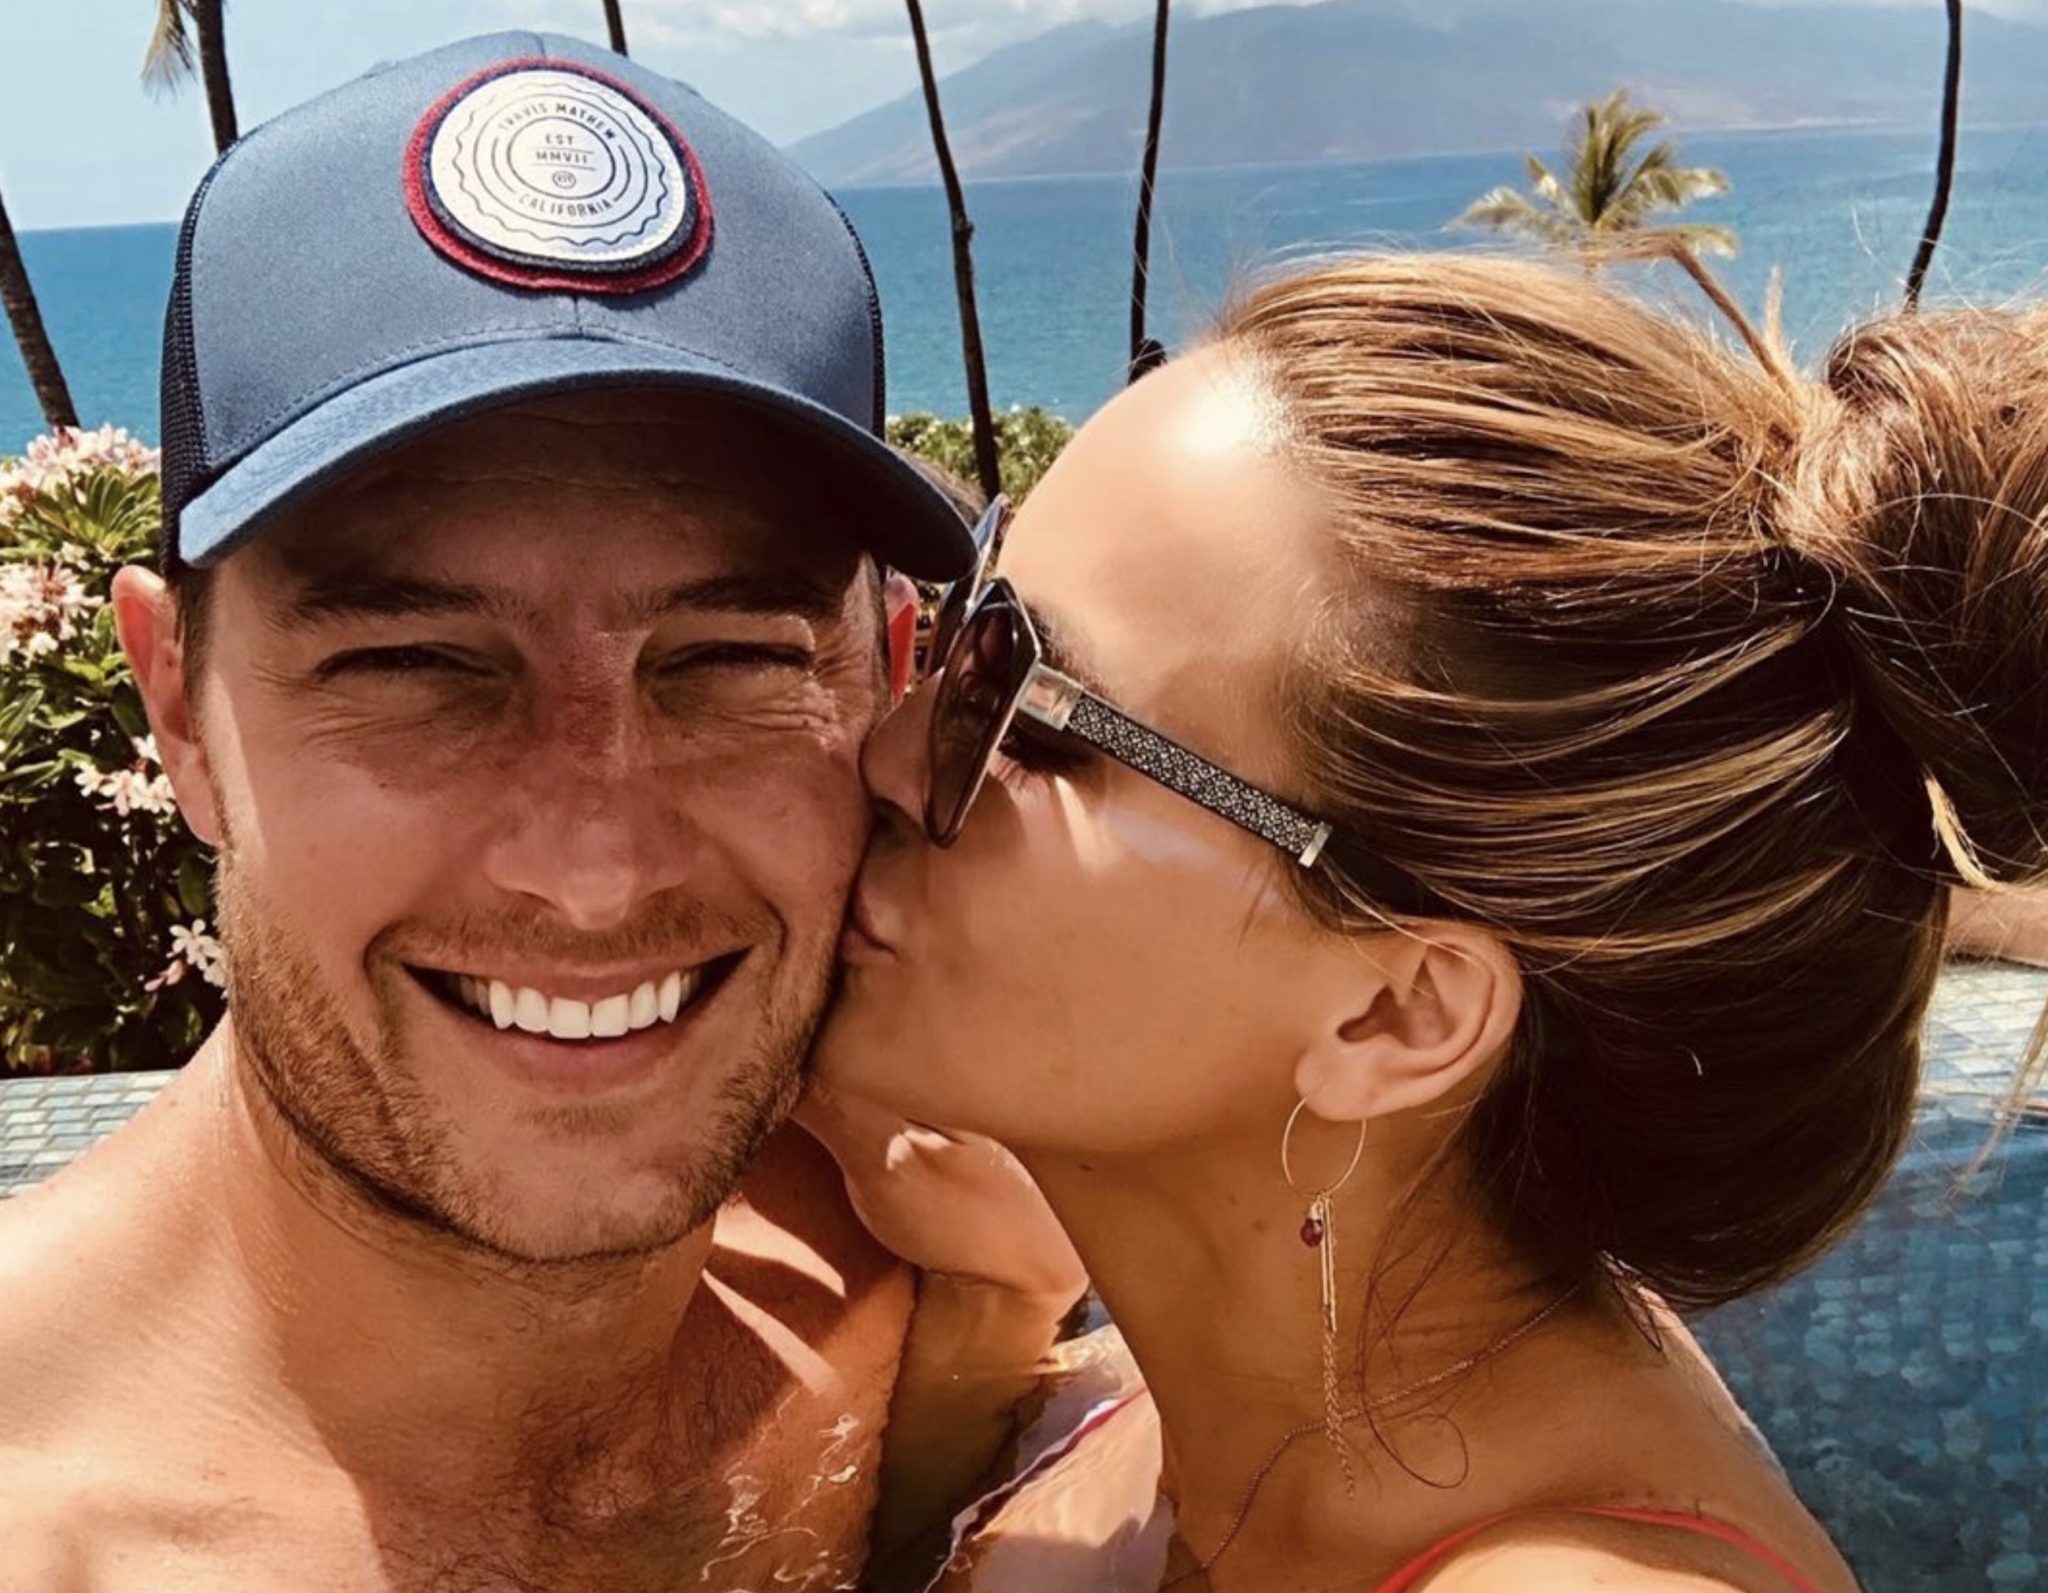 Justin Hartley, Chrishell Stause Hartley, This Is Us-https://www.instagram.com/p/By5pIwEnkxu/